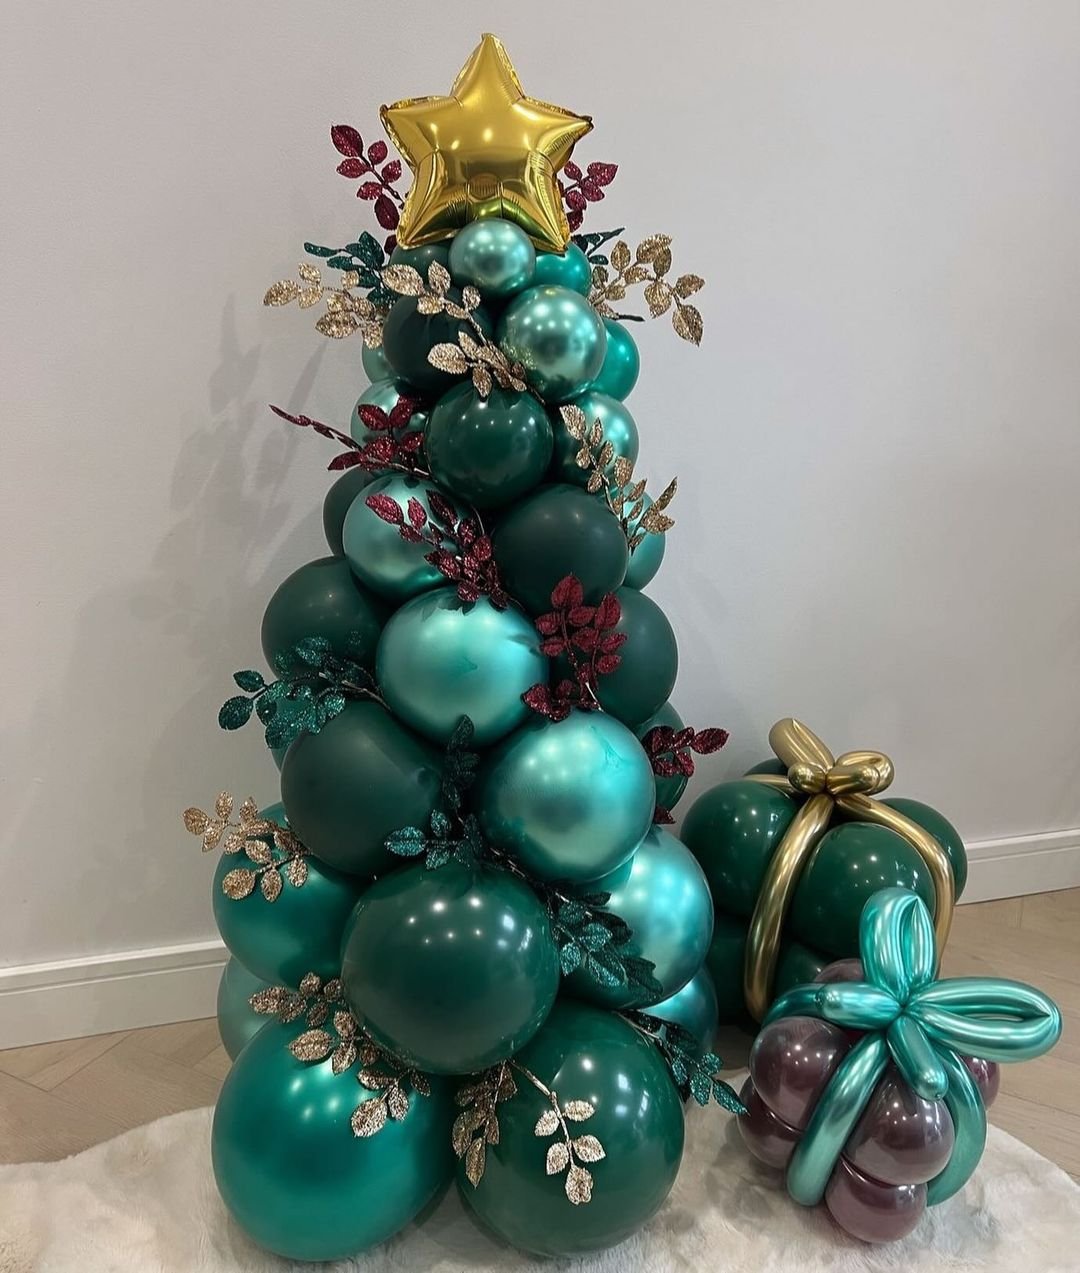 A festive green Christmas tree adorned with gold and green balloons, creating a vibrant and joyful Balloon Tree.